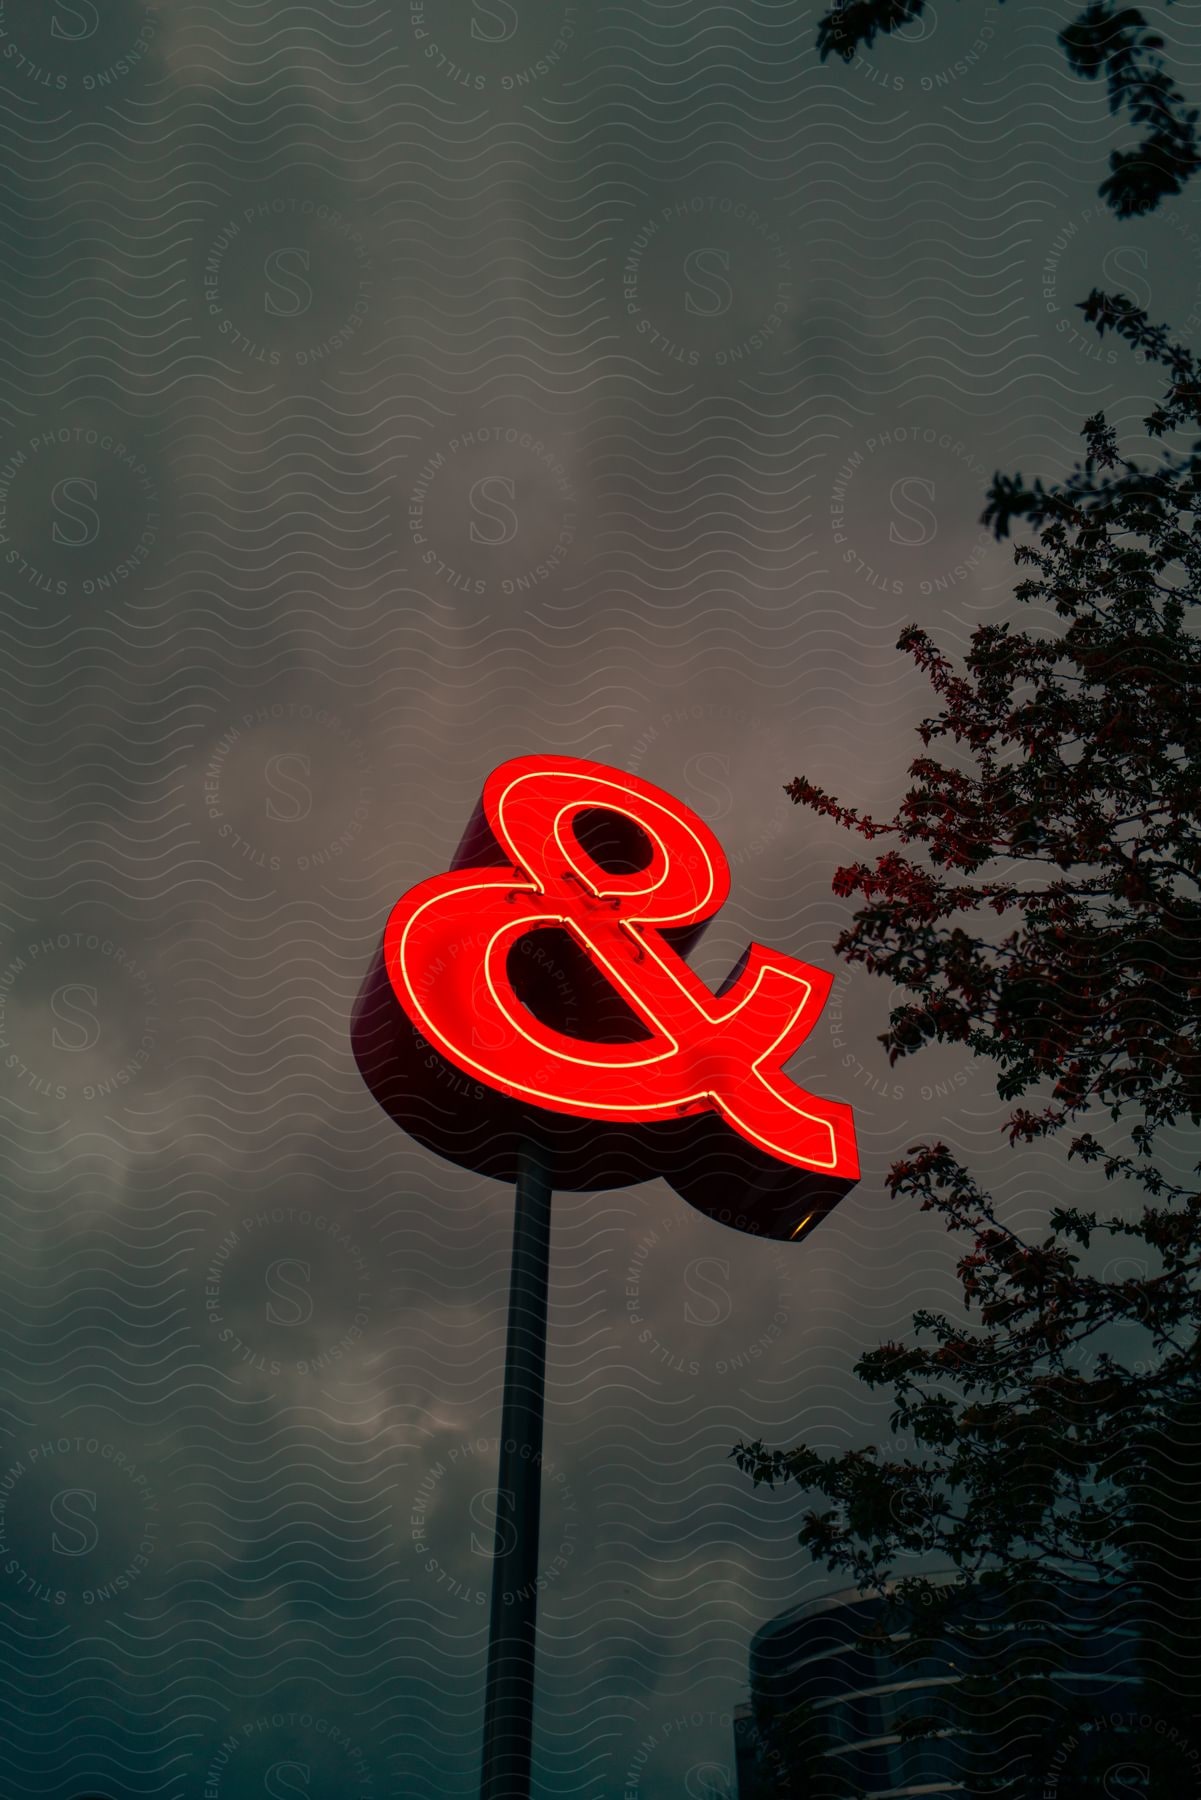 An ampersand neon sign next to a tree shines brightly under a dark cloudy sky in an urban setting